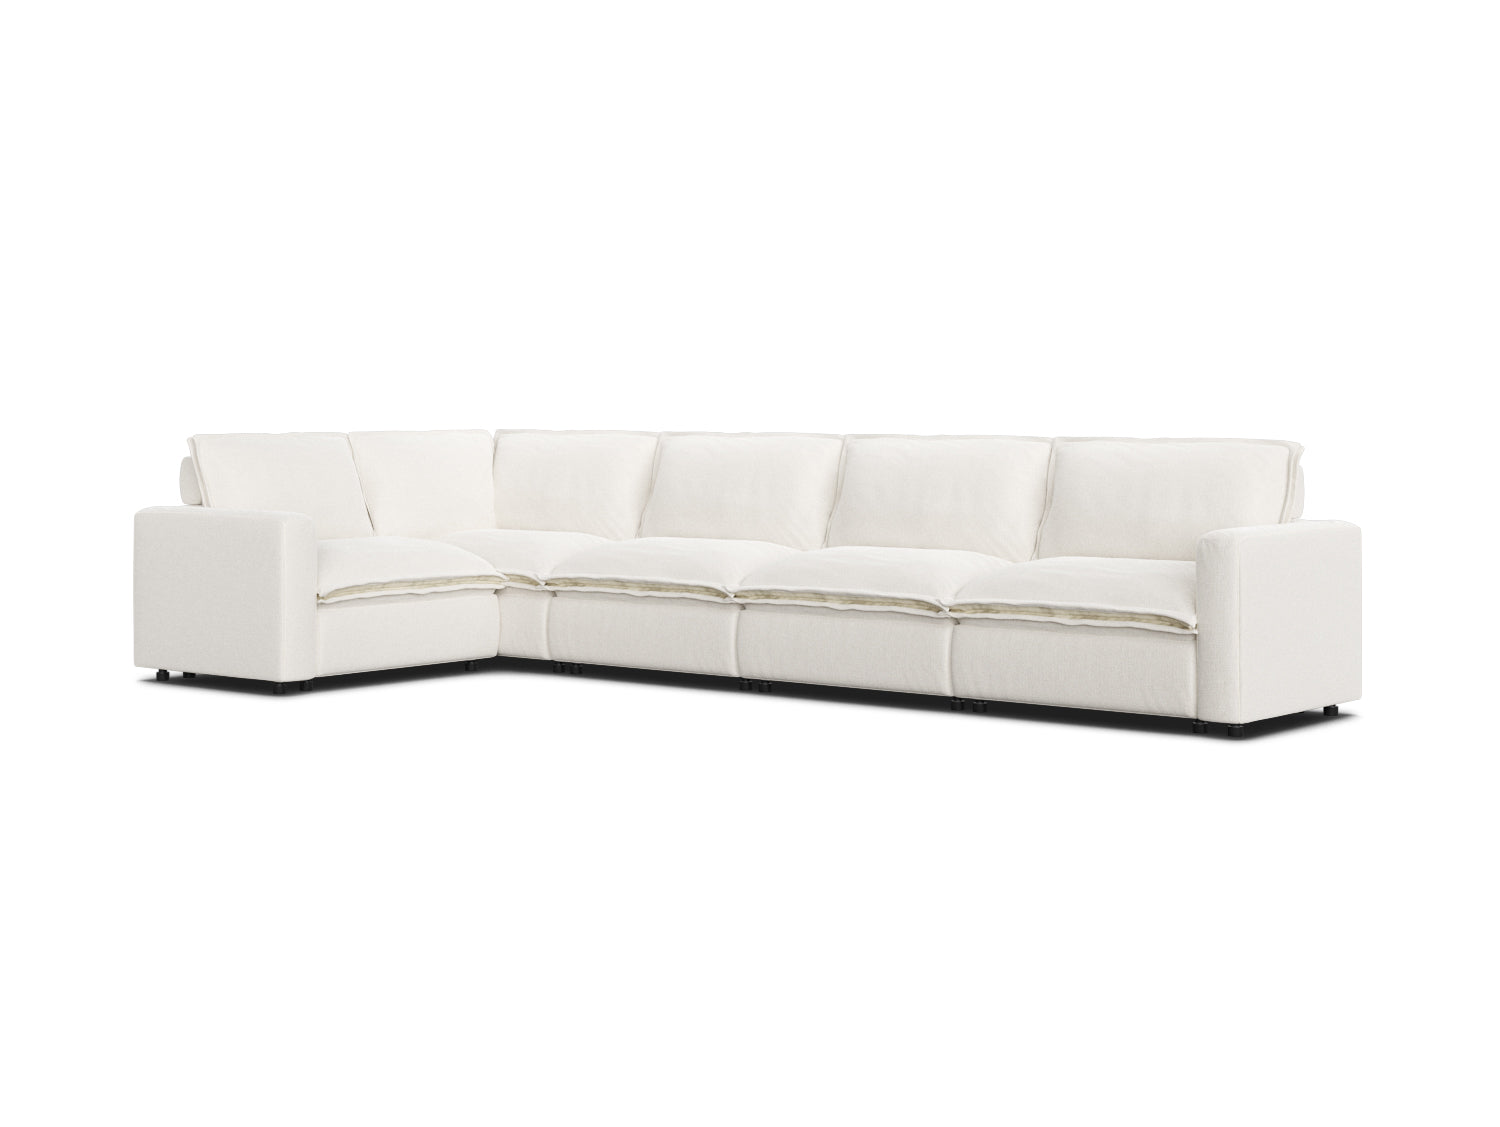 Corner sectional couch in white linen with 5 seats, modular